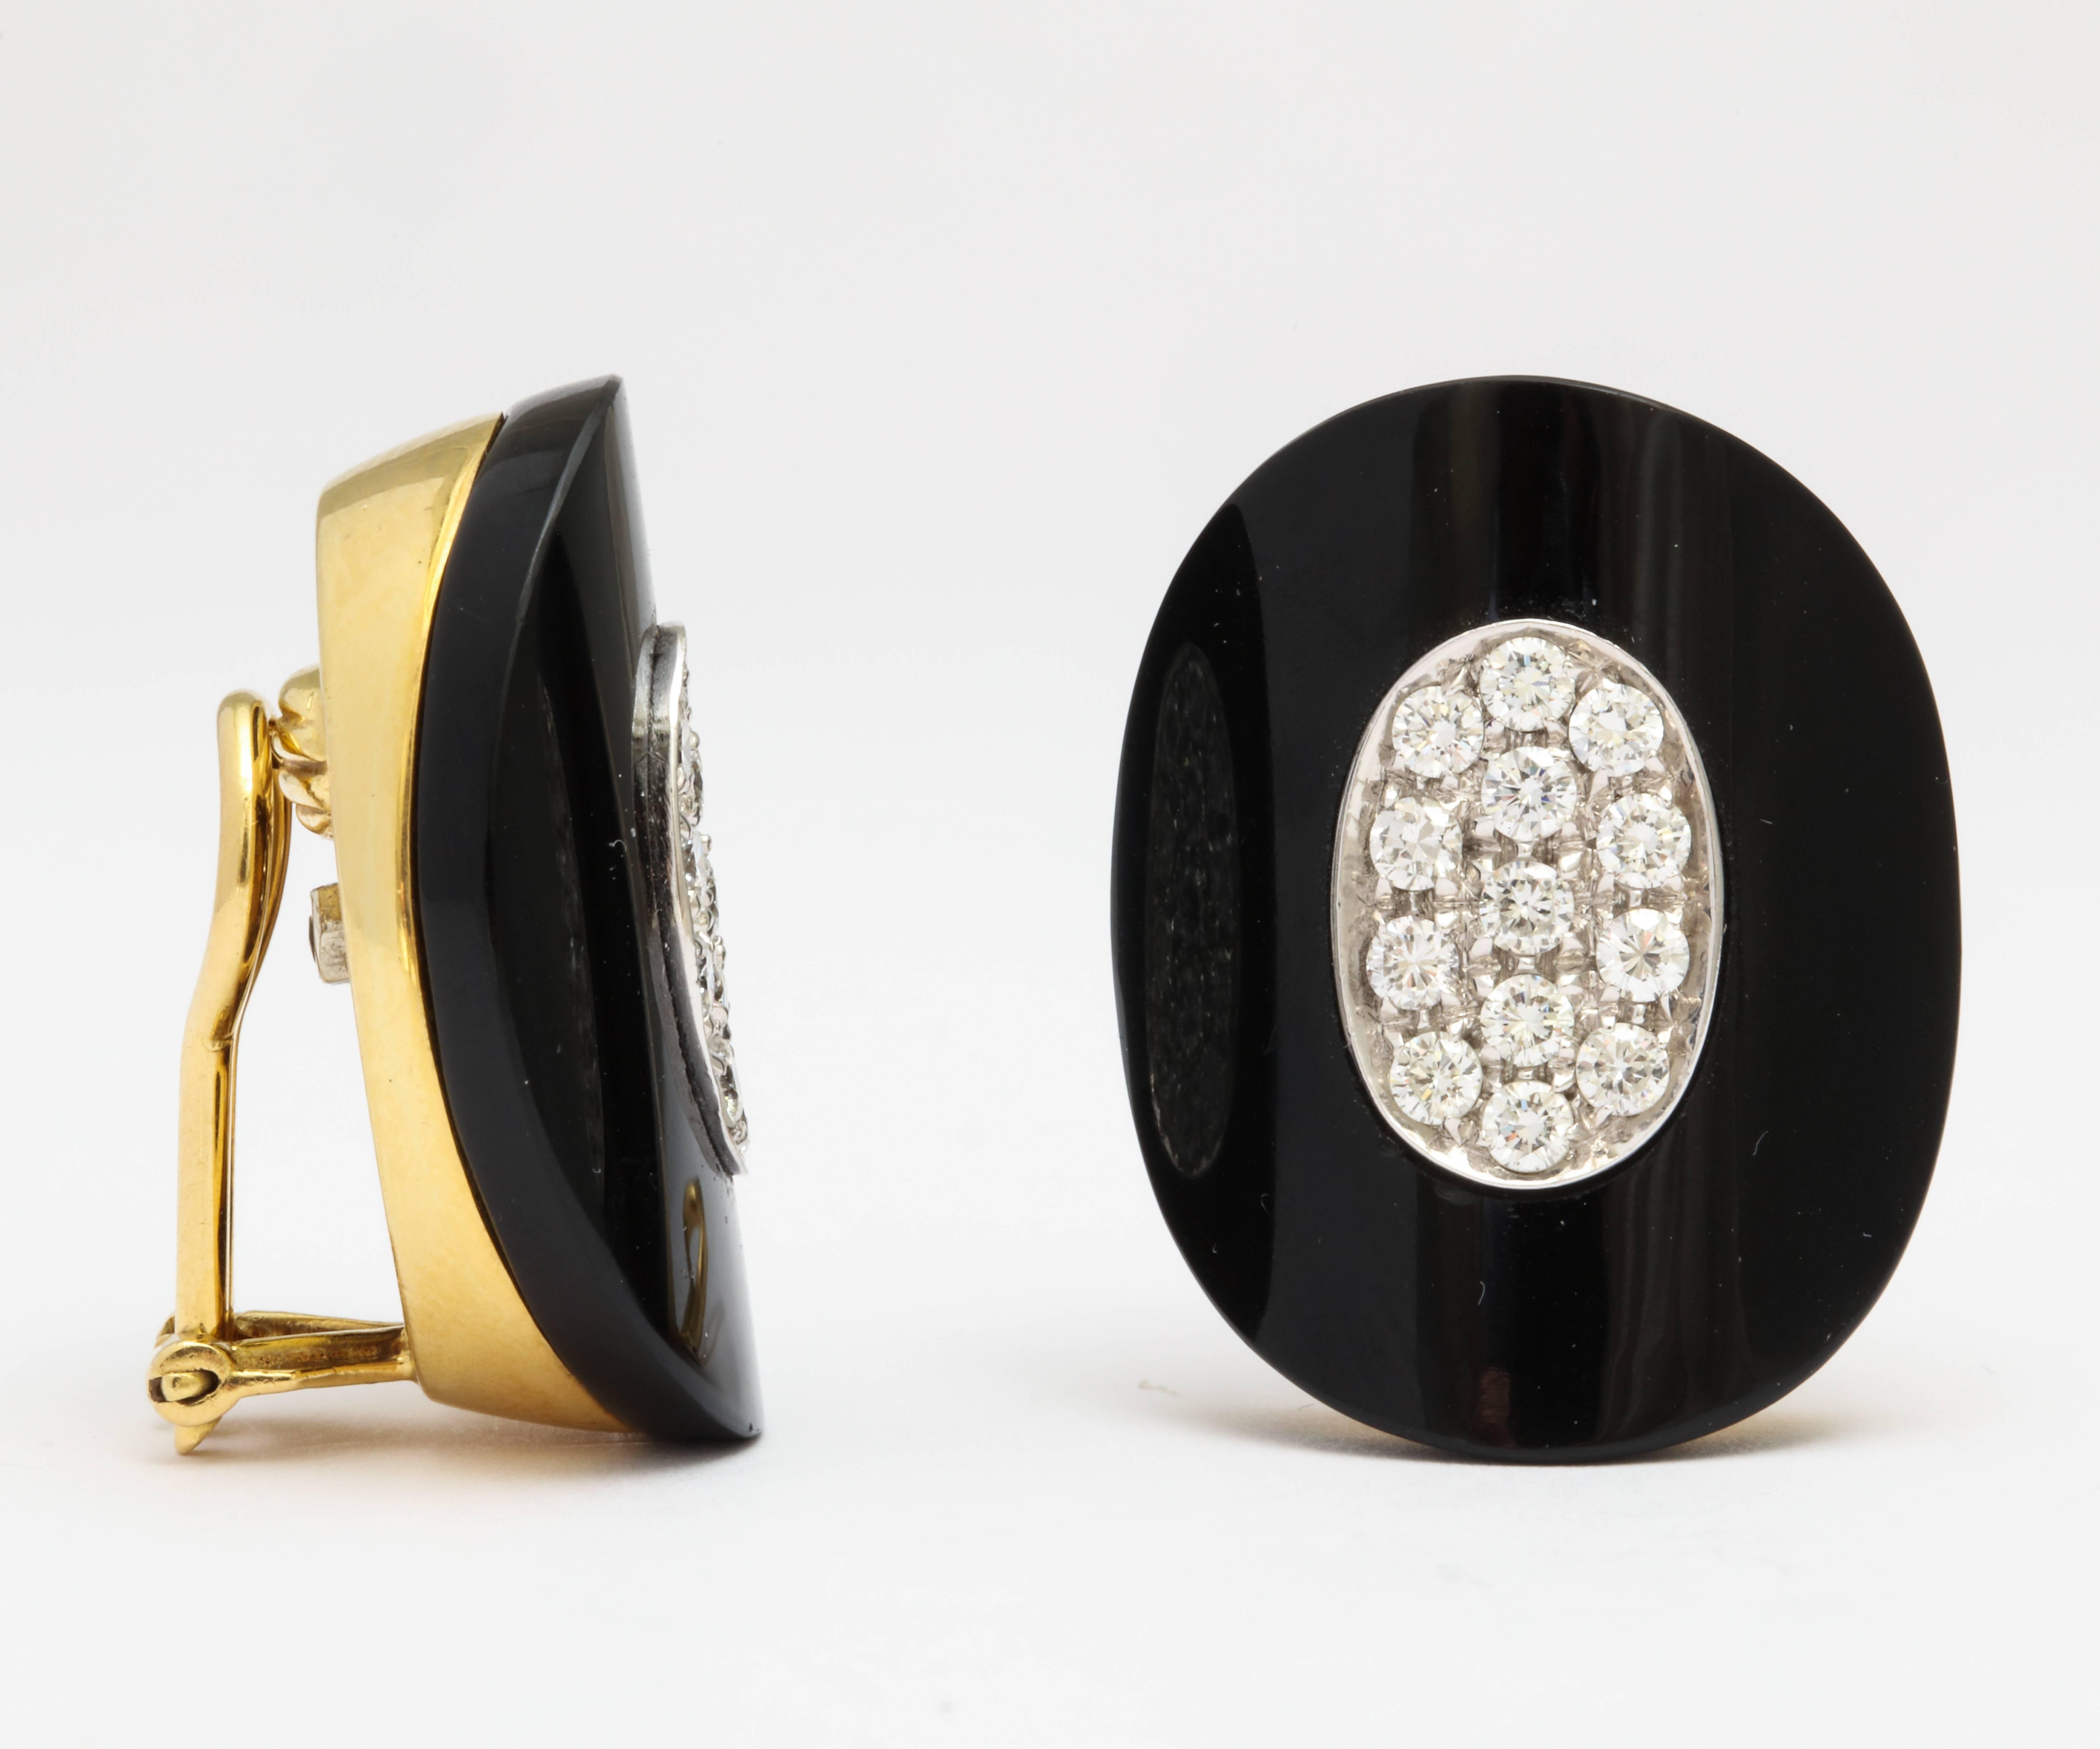 A pair of 18 karat yellow gold, diamond and onyx earclips. The total diamond weight is approximately 2 carats. Stamped 750 for 18 karat and an undistinguishable signature.  Posts can be added at no additional cost.